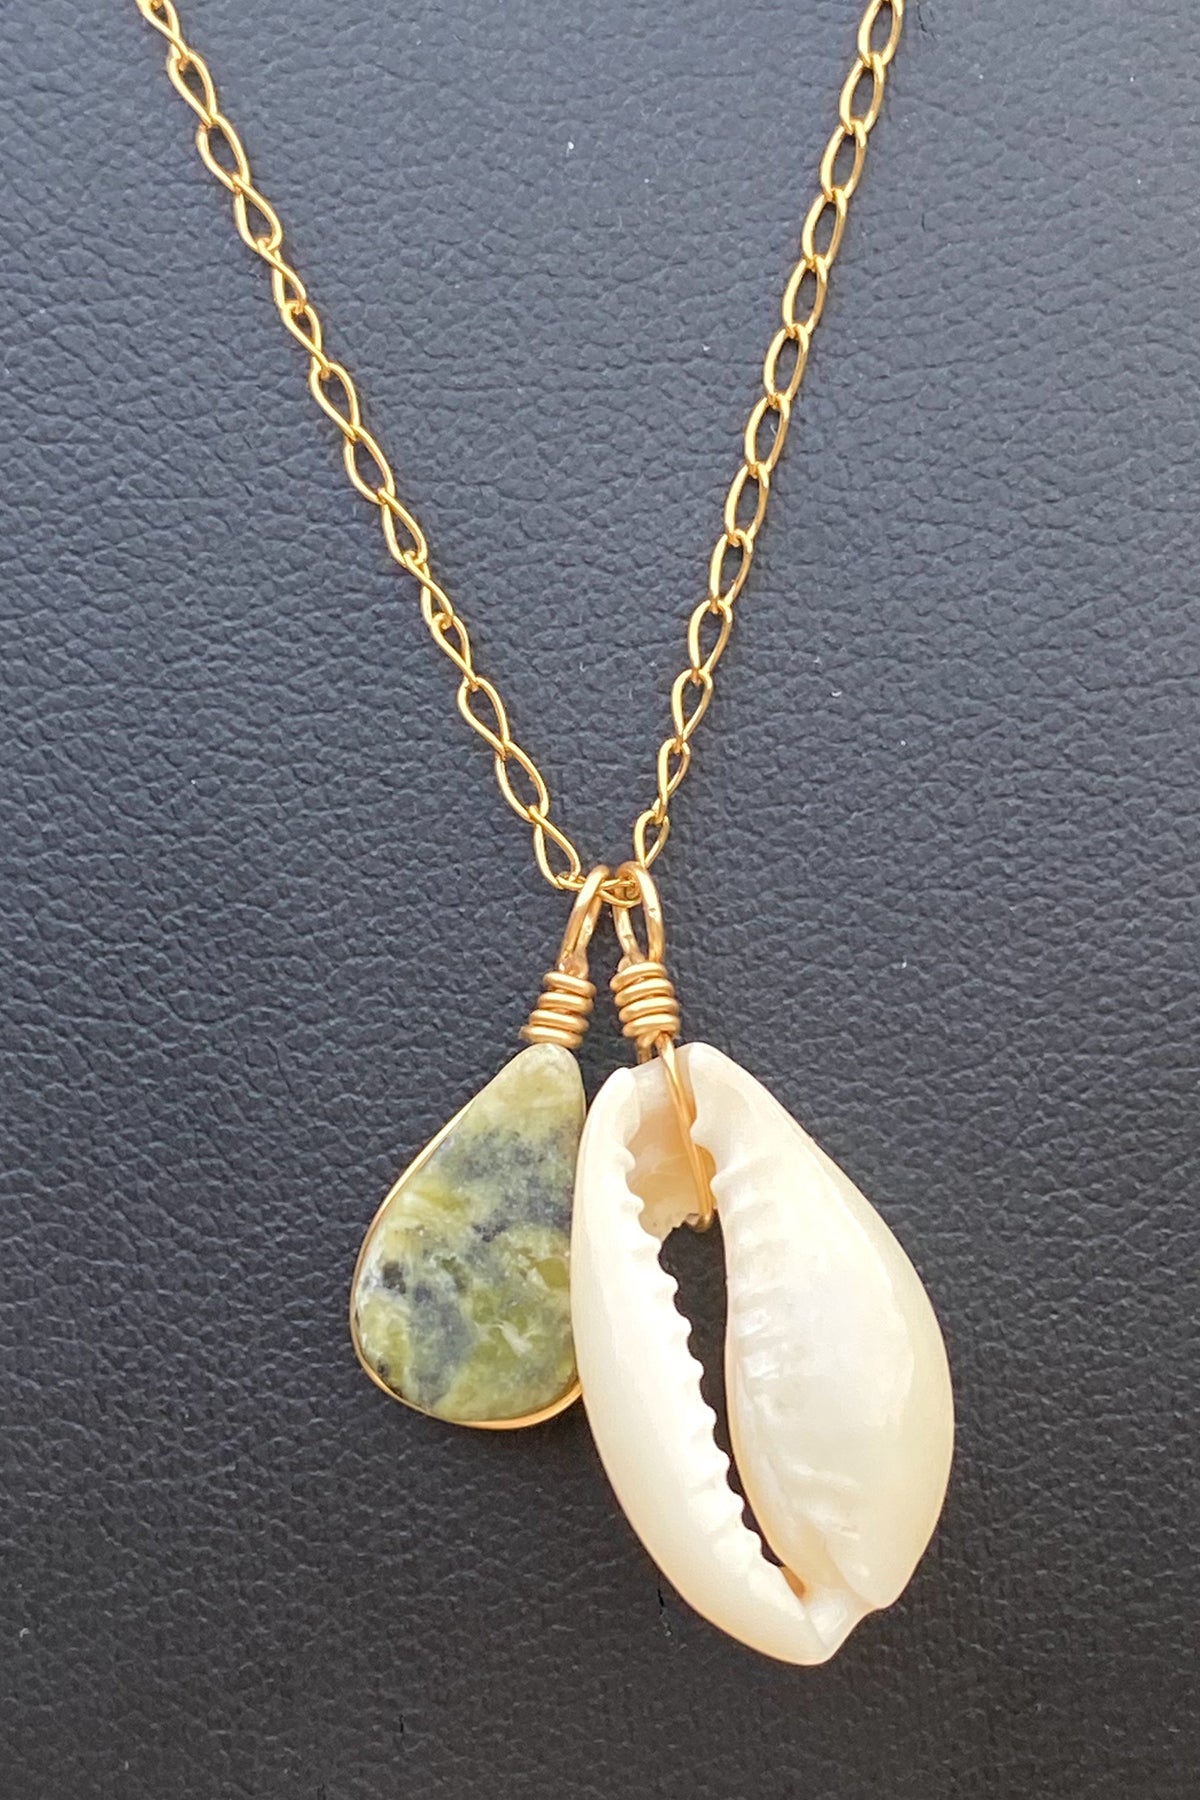 14K Gold Filled Necklace -Cowrie And Stone - 4 Varieties